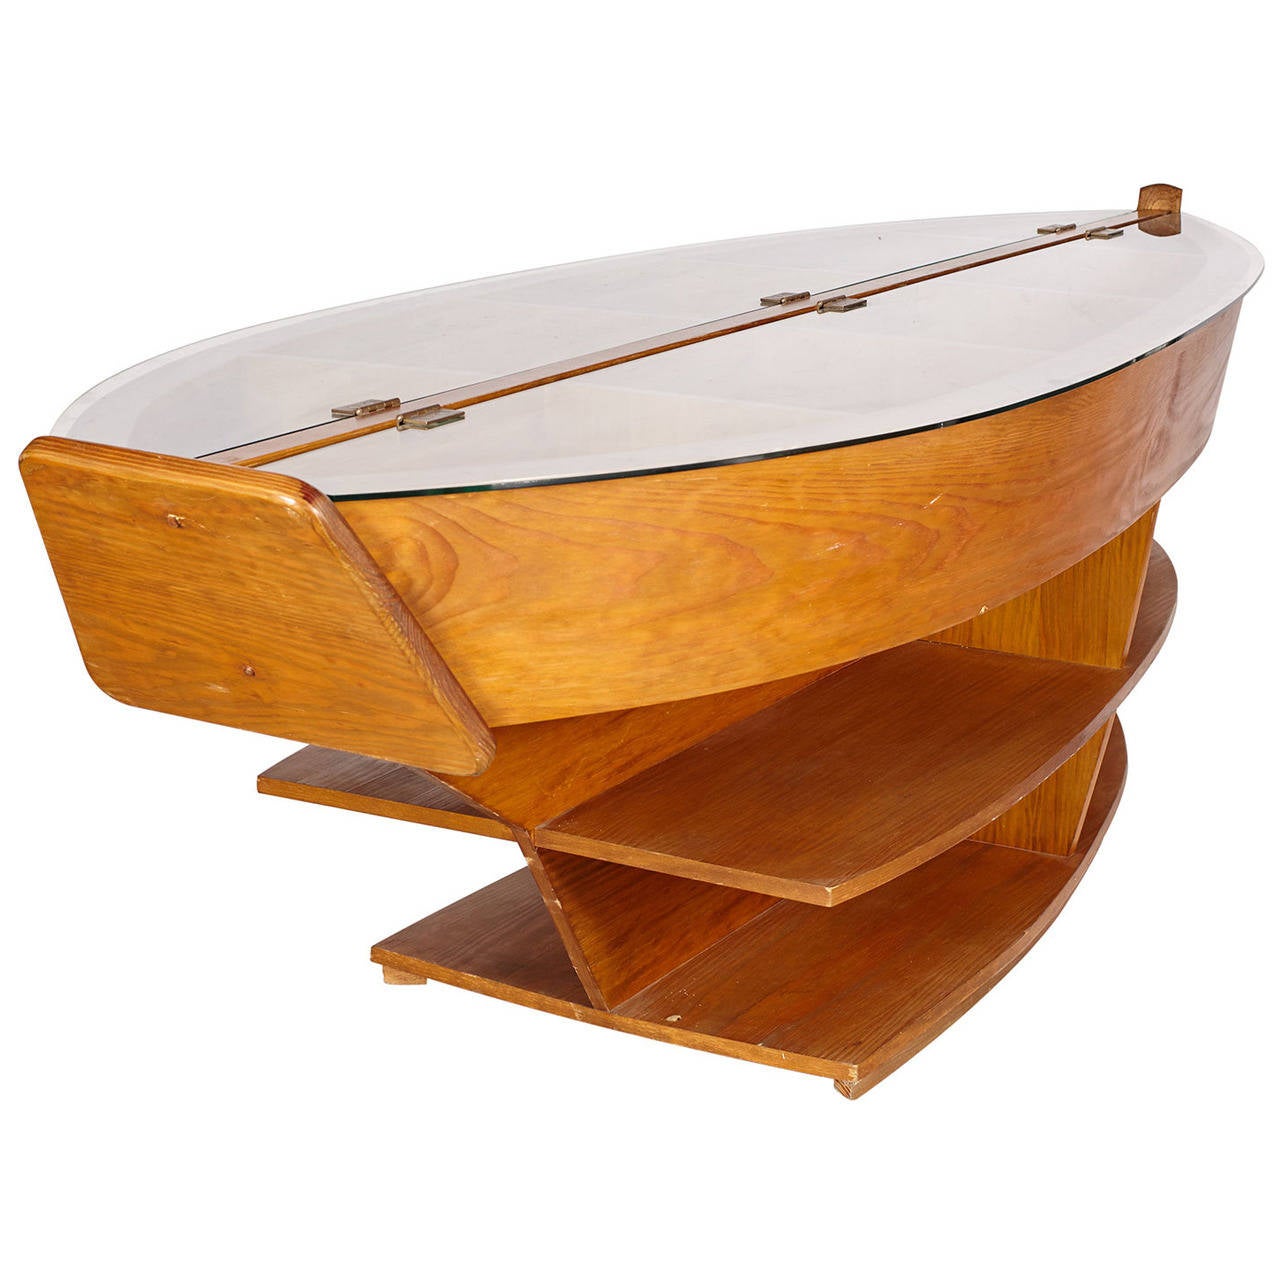 A beautiful table or library case in the form of a boat. Shelving on both sides. Glass top on hinges with shallow compartment storage under.